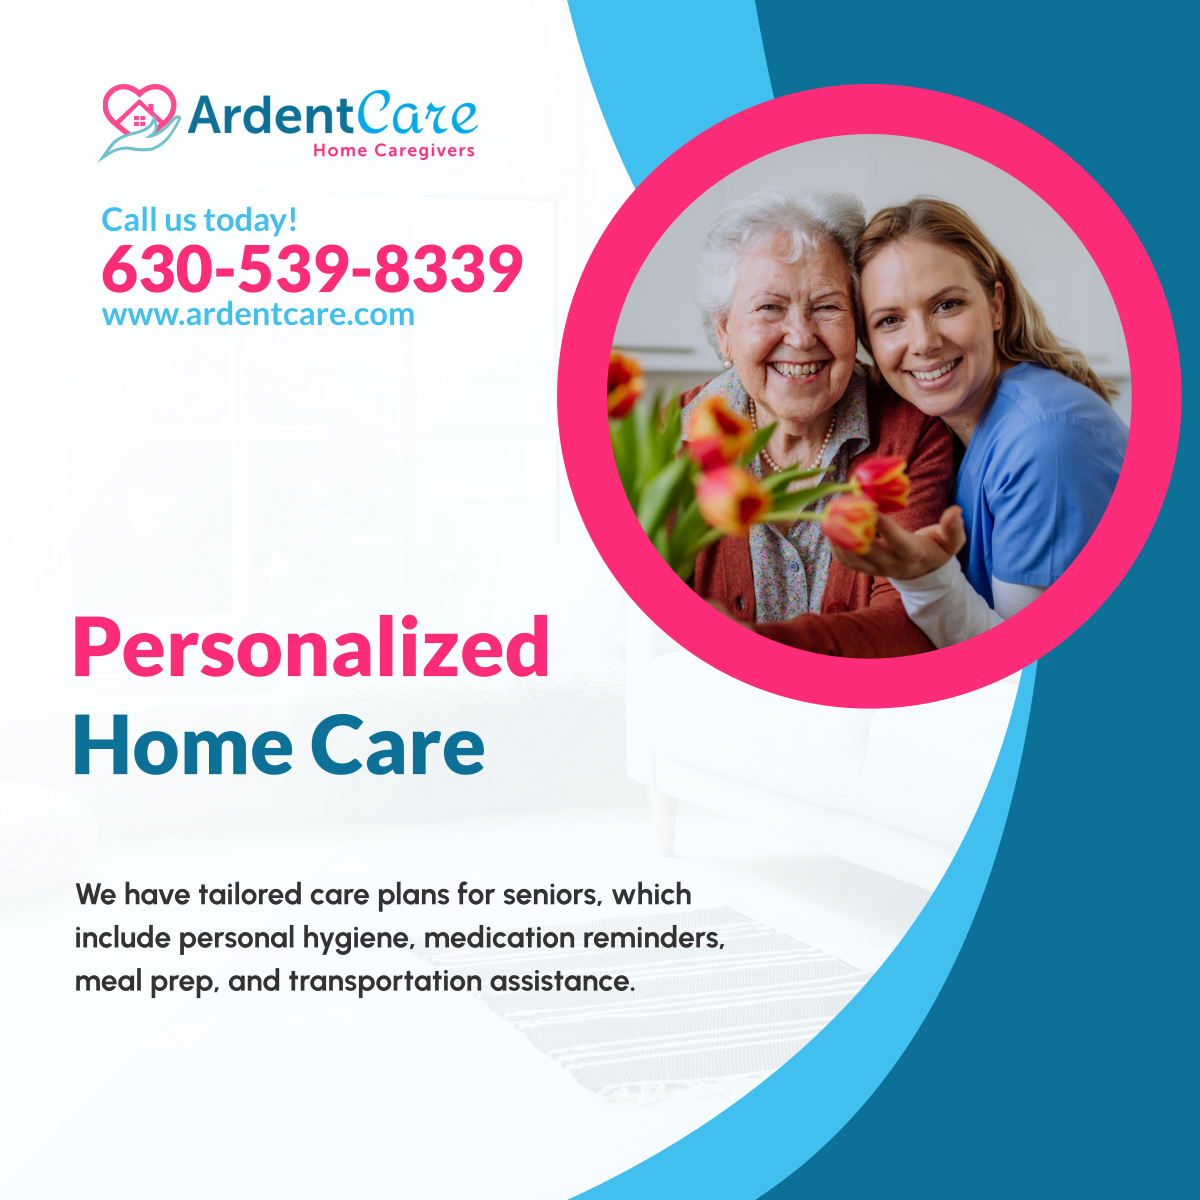 Discover how our personalized home care services cater to your loved one's unique needs. Contact us today! 

#BloomingdaleIL #HomeCare #PersonalizedCare